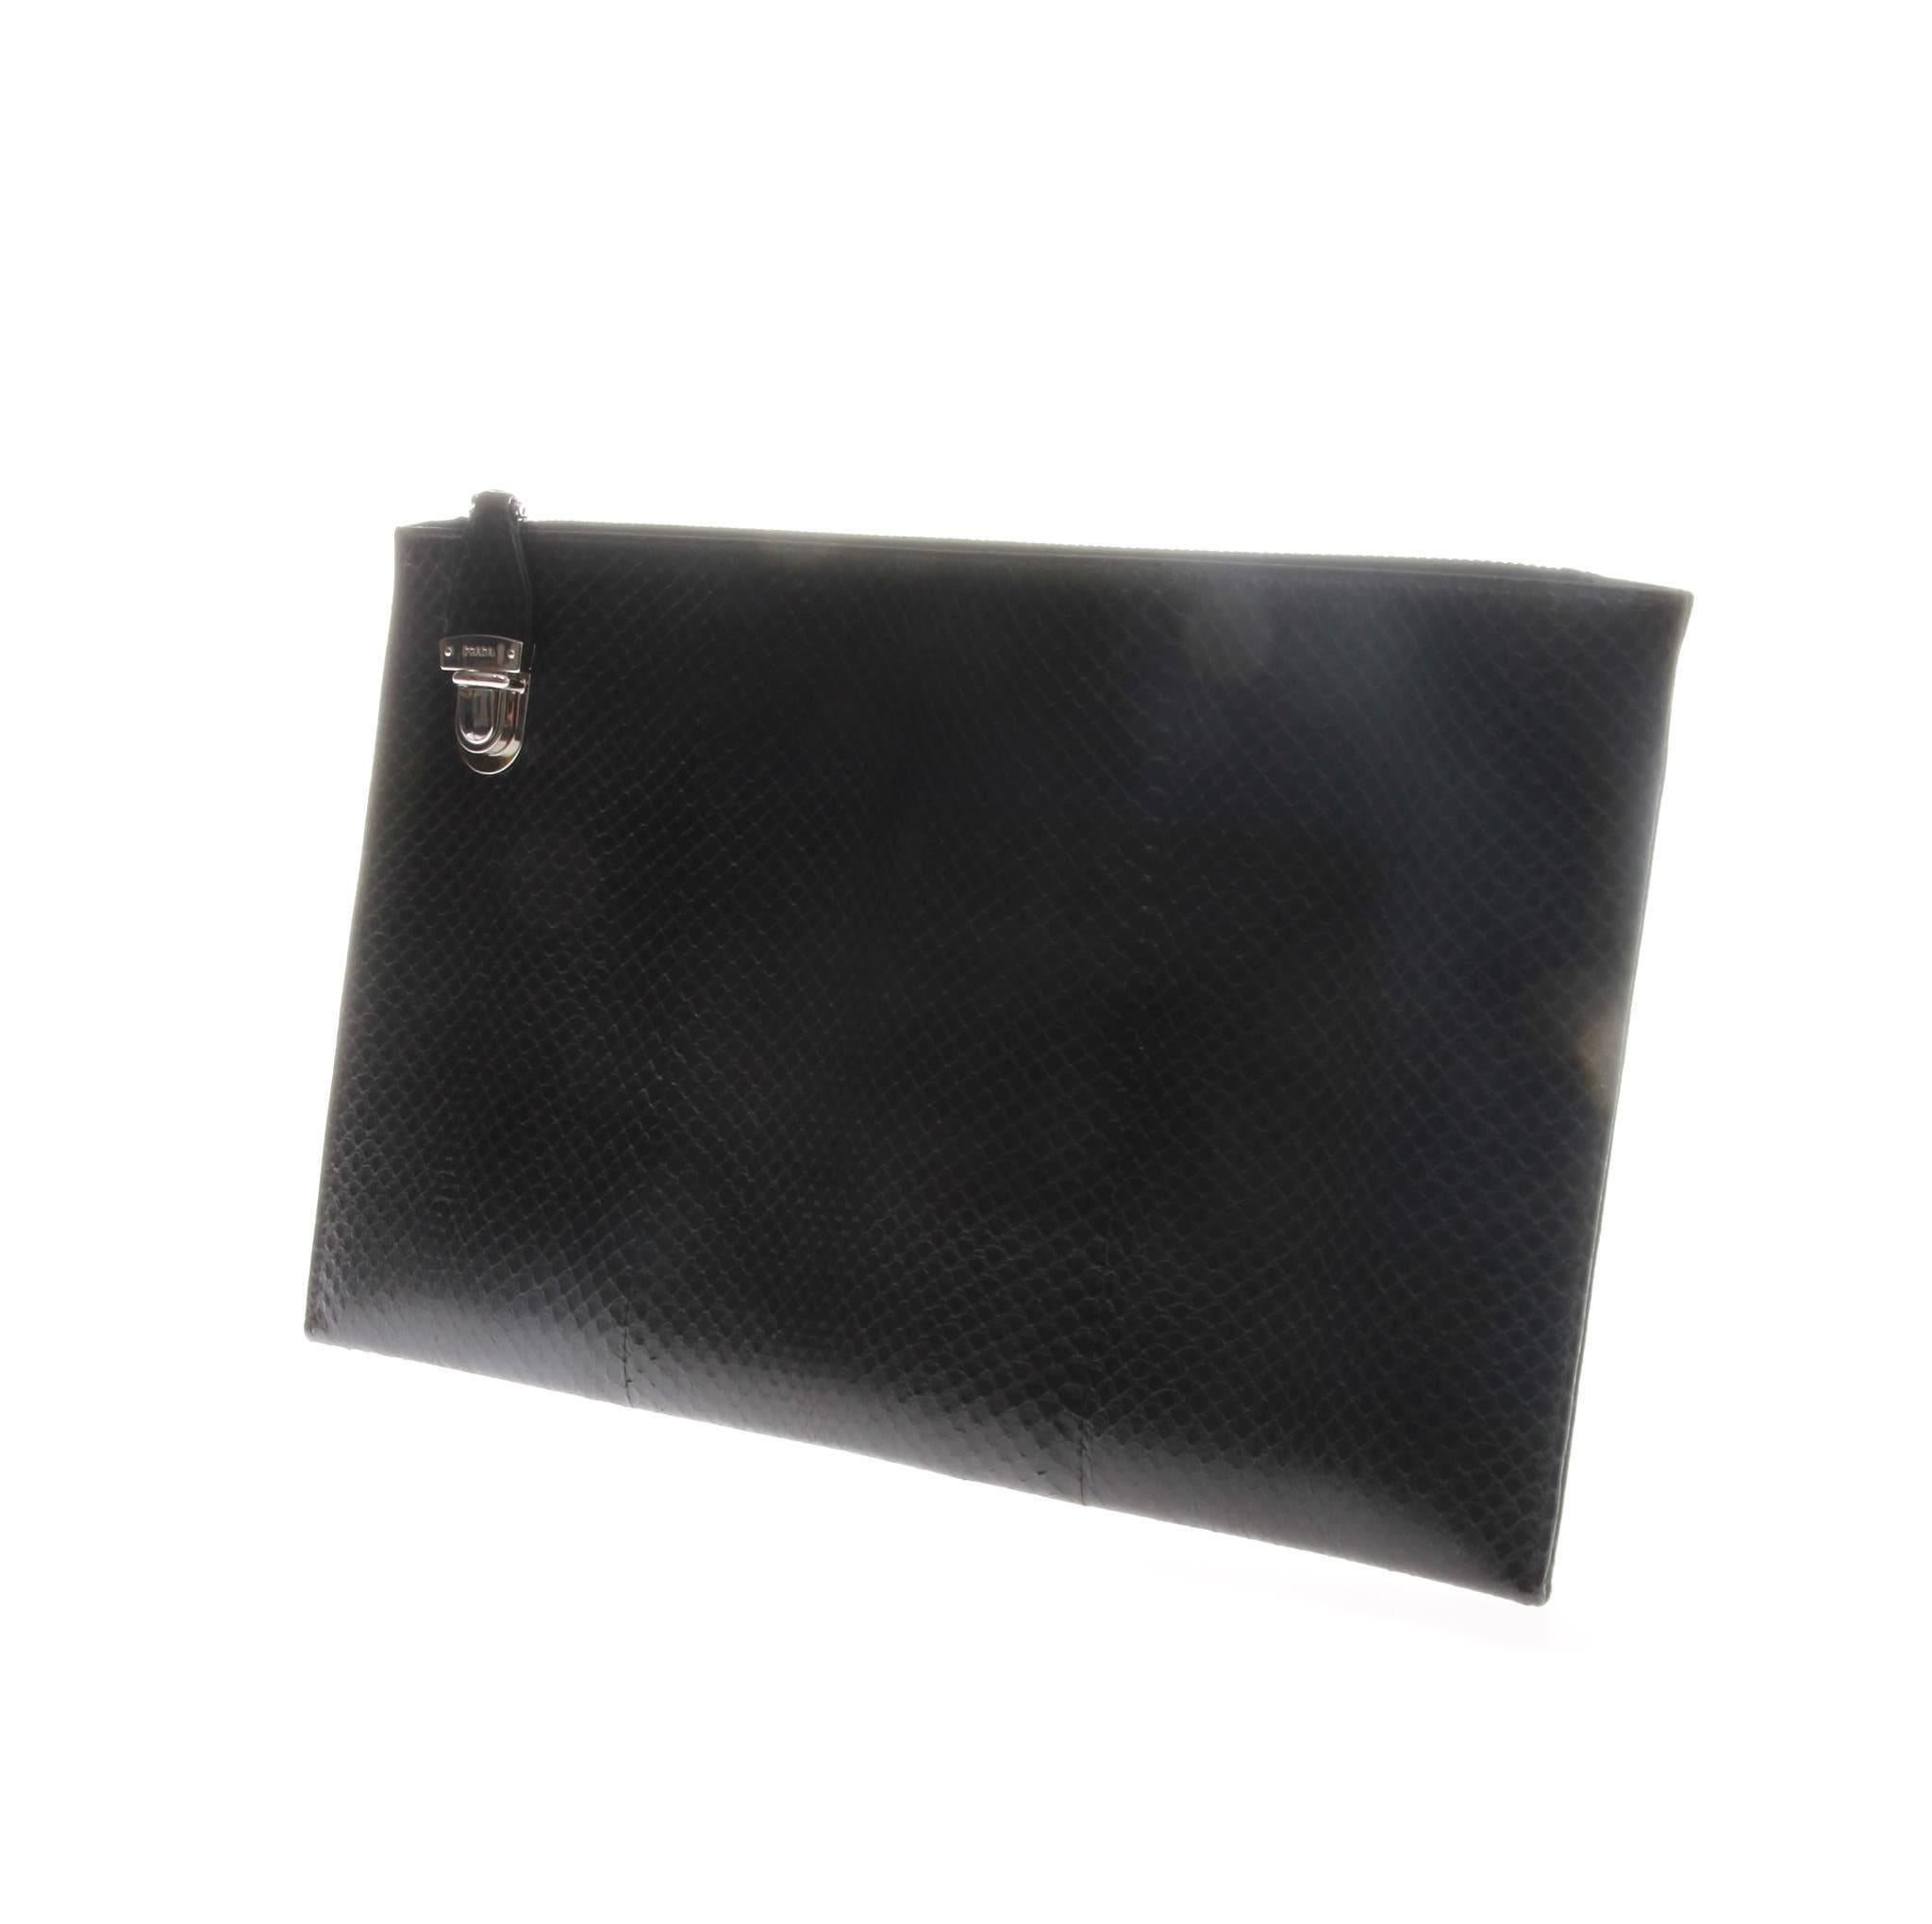 Prada black snakeskin-look leather document holder-type clutch/pouch. Silver-tone hardware with zipper closure to single compartment and branded push lock closure. 